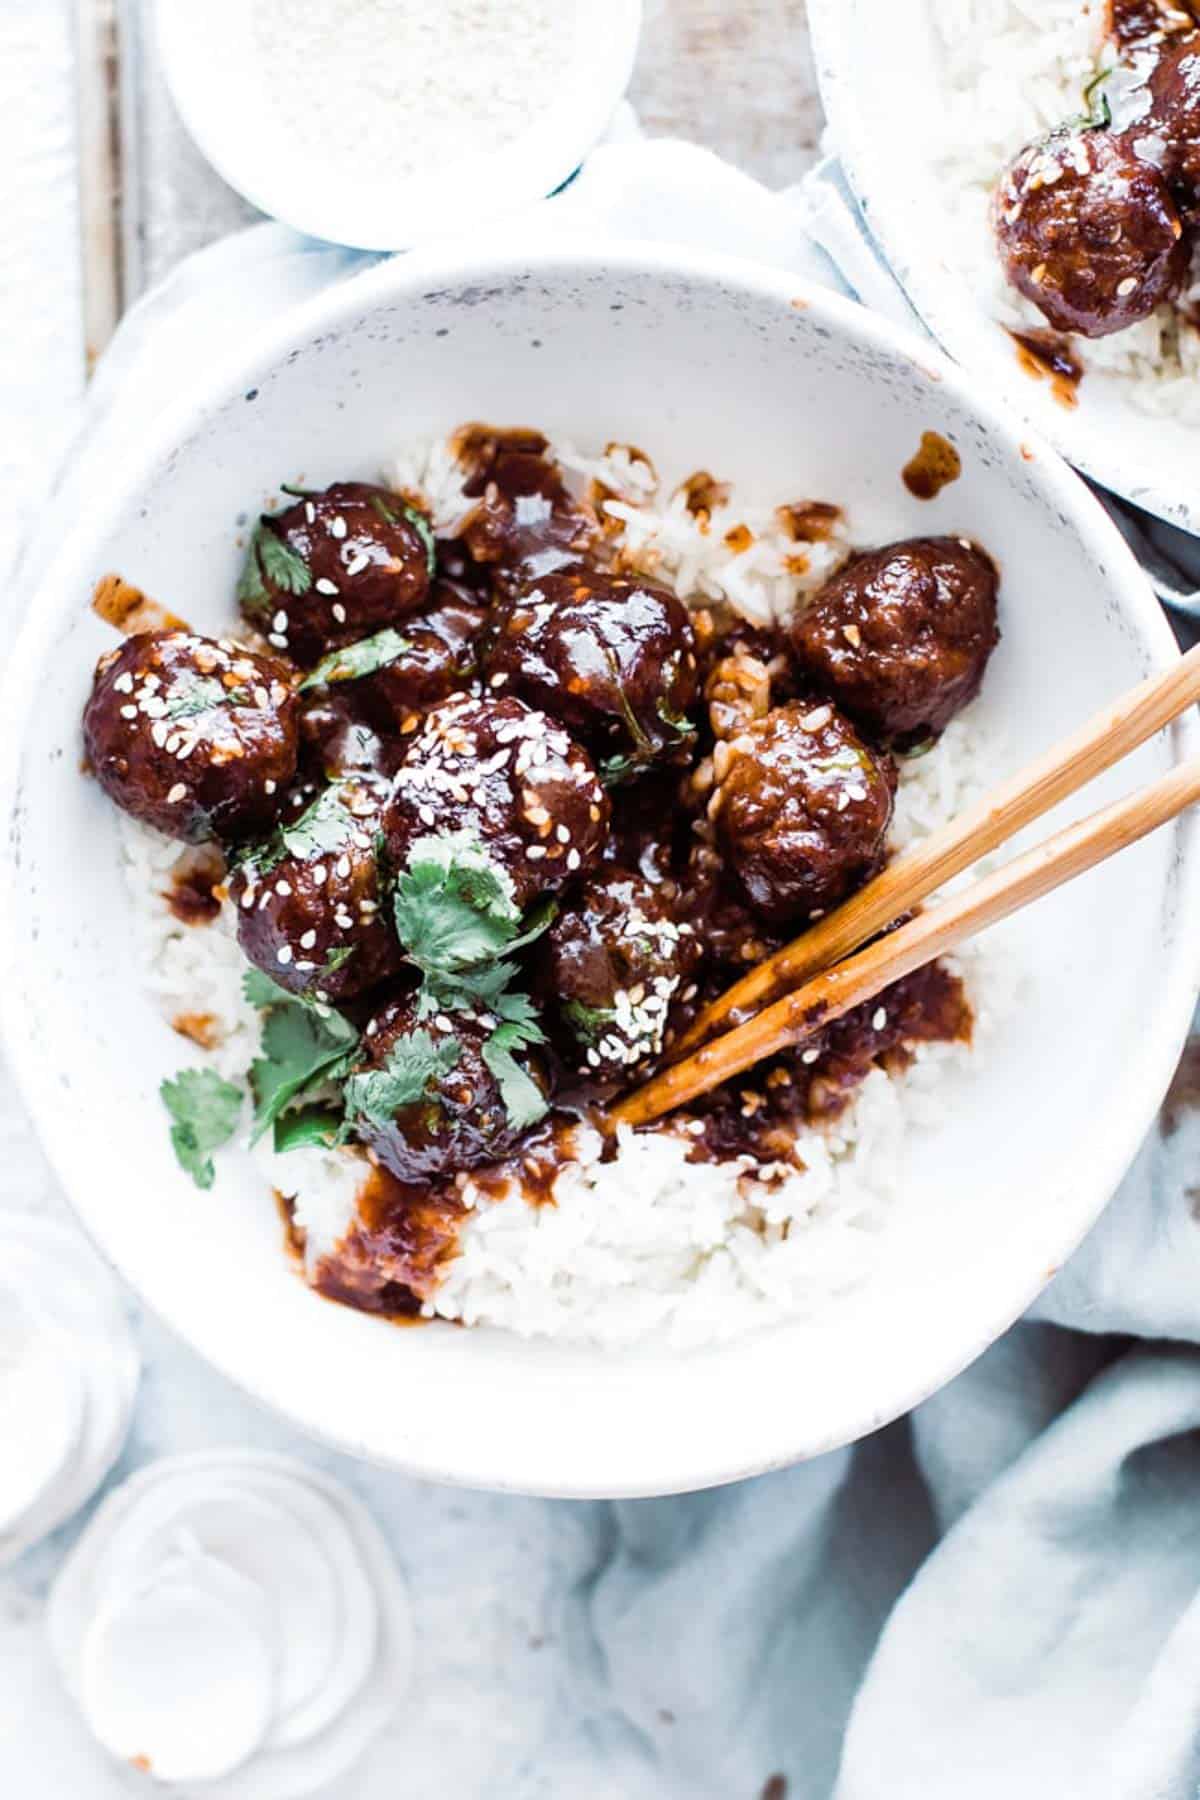 One bowl of easy sweet and sour meatball with chopsticks.